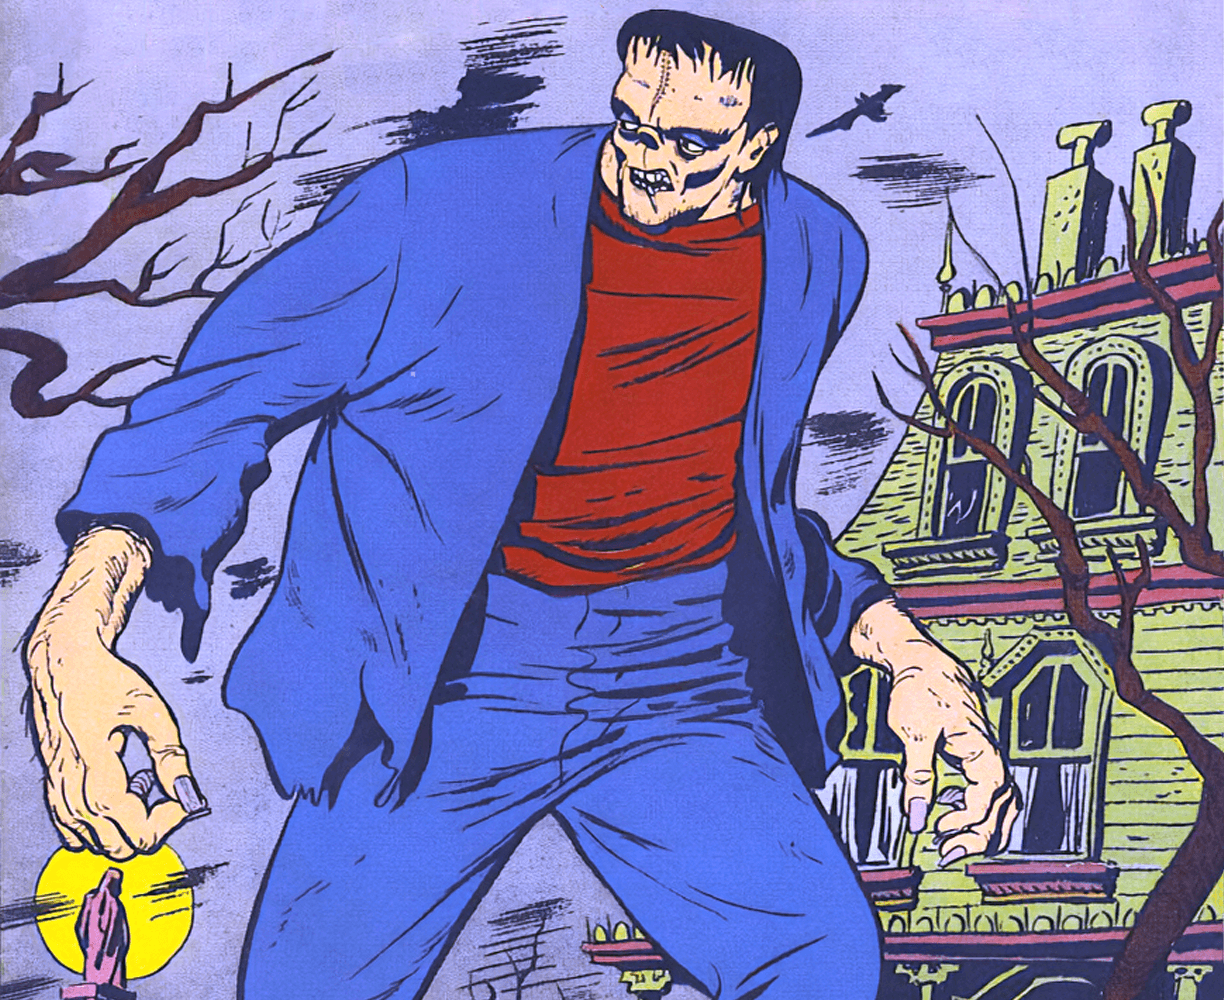 The cover art for the episode The Tomb of the Living Dead 12 from the comics series Frankenstein - The Return, which is number 34 in the series